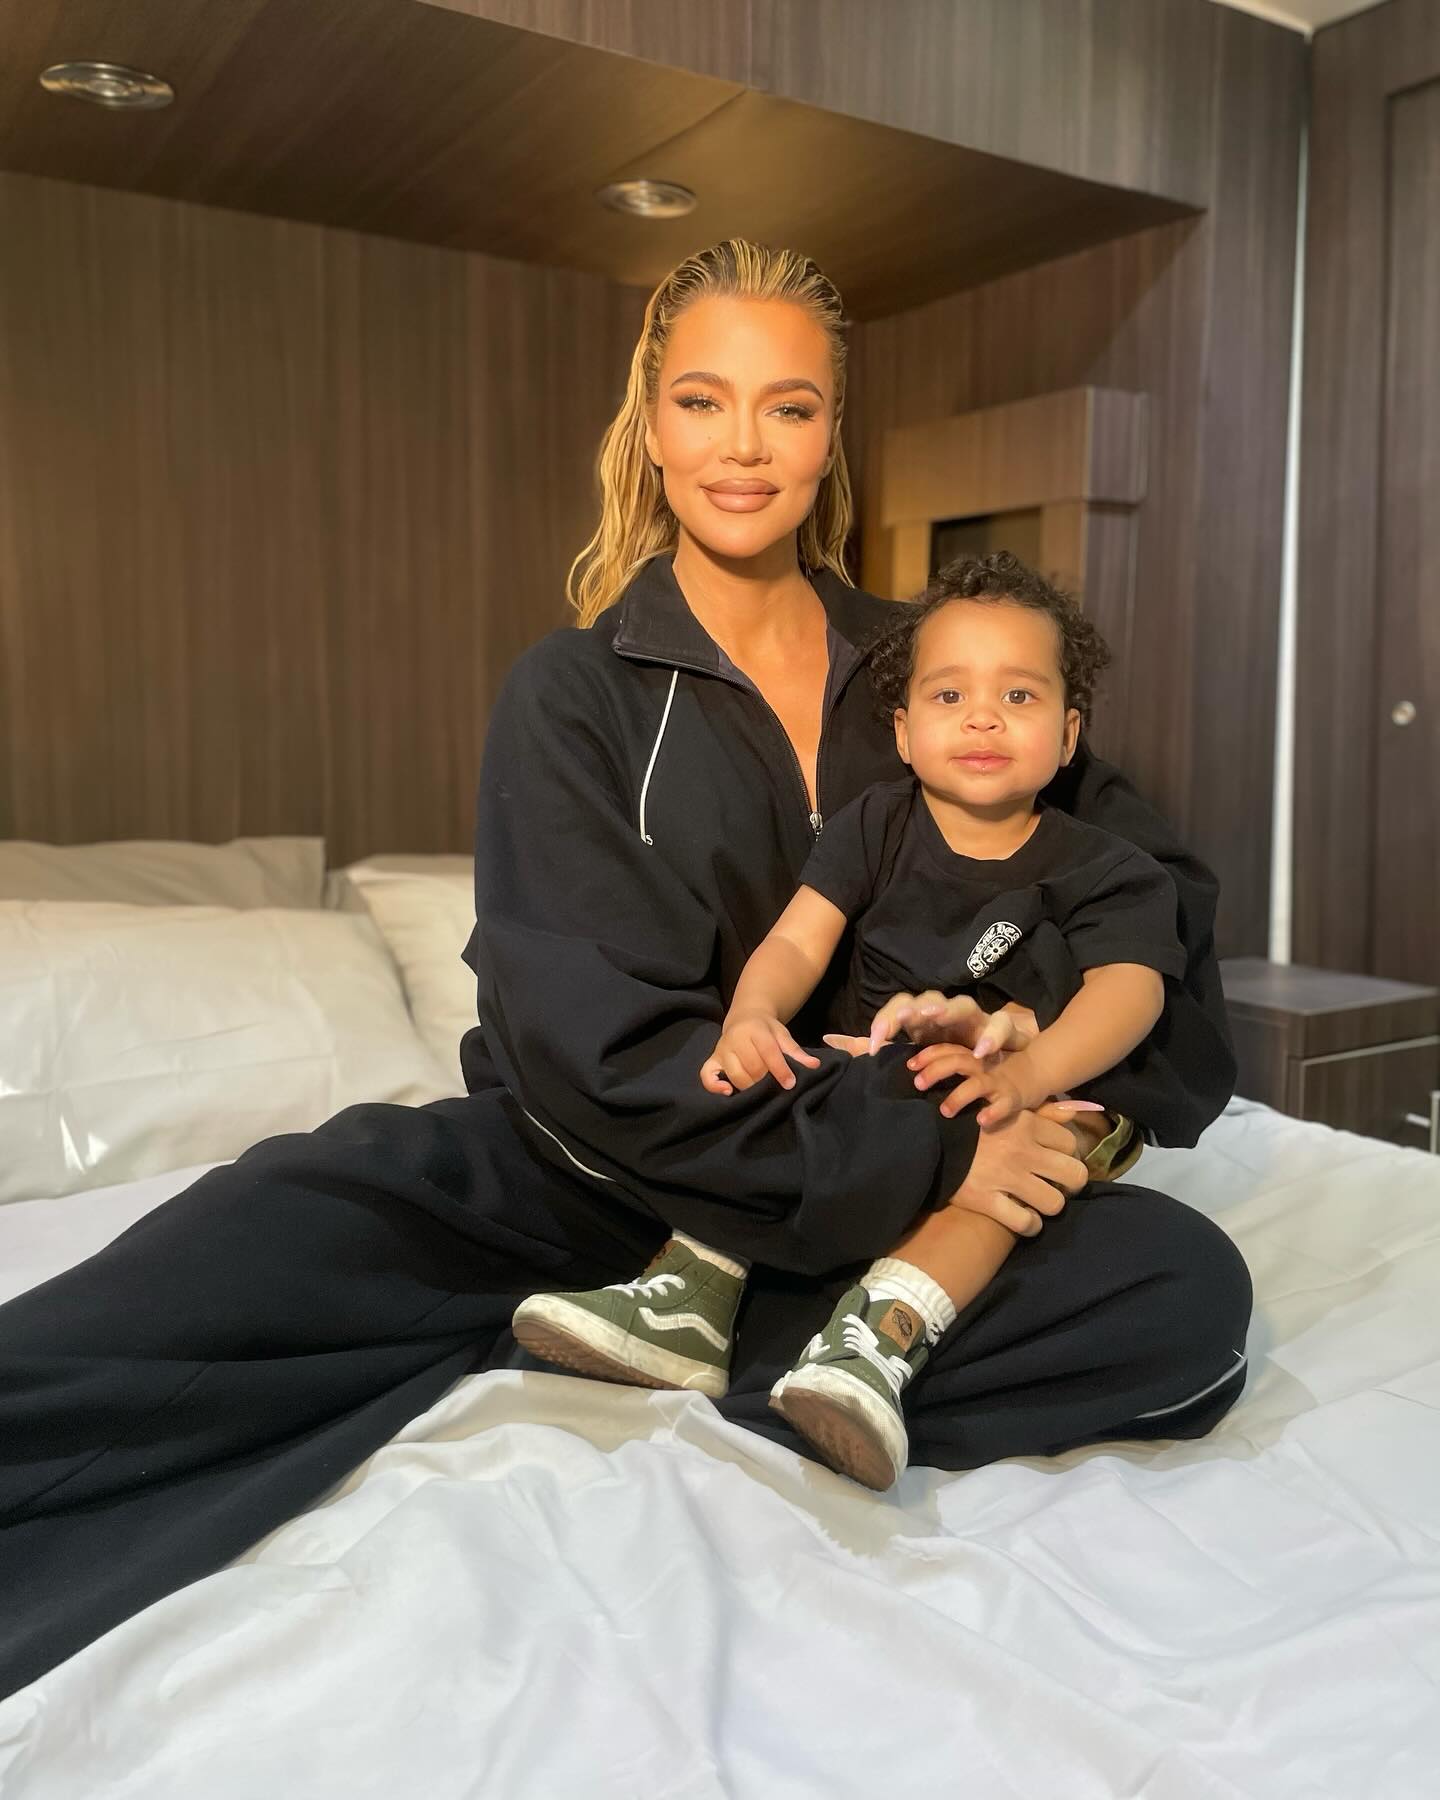 Khloe posed with her son Tatum for a sweet photo